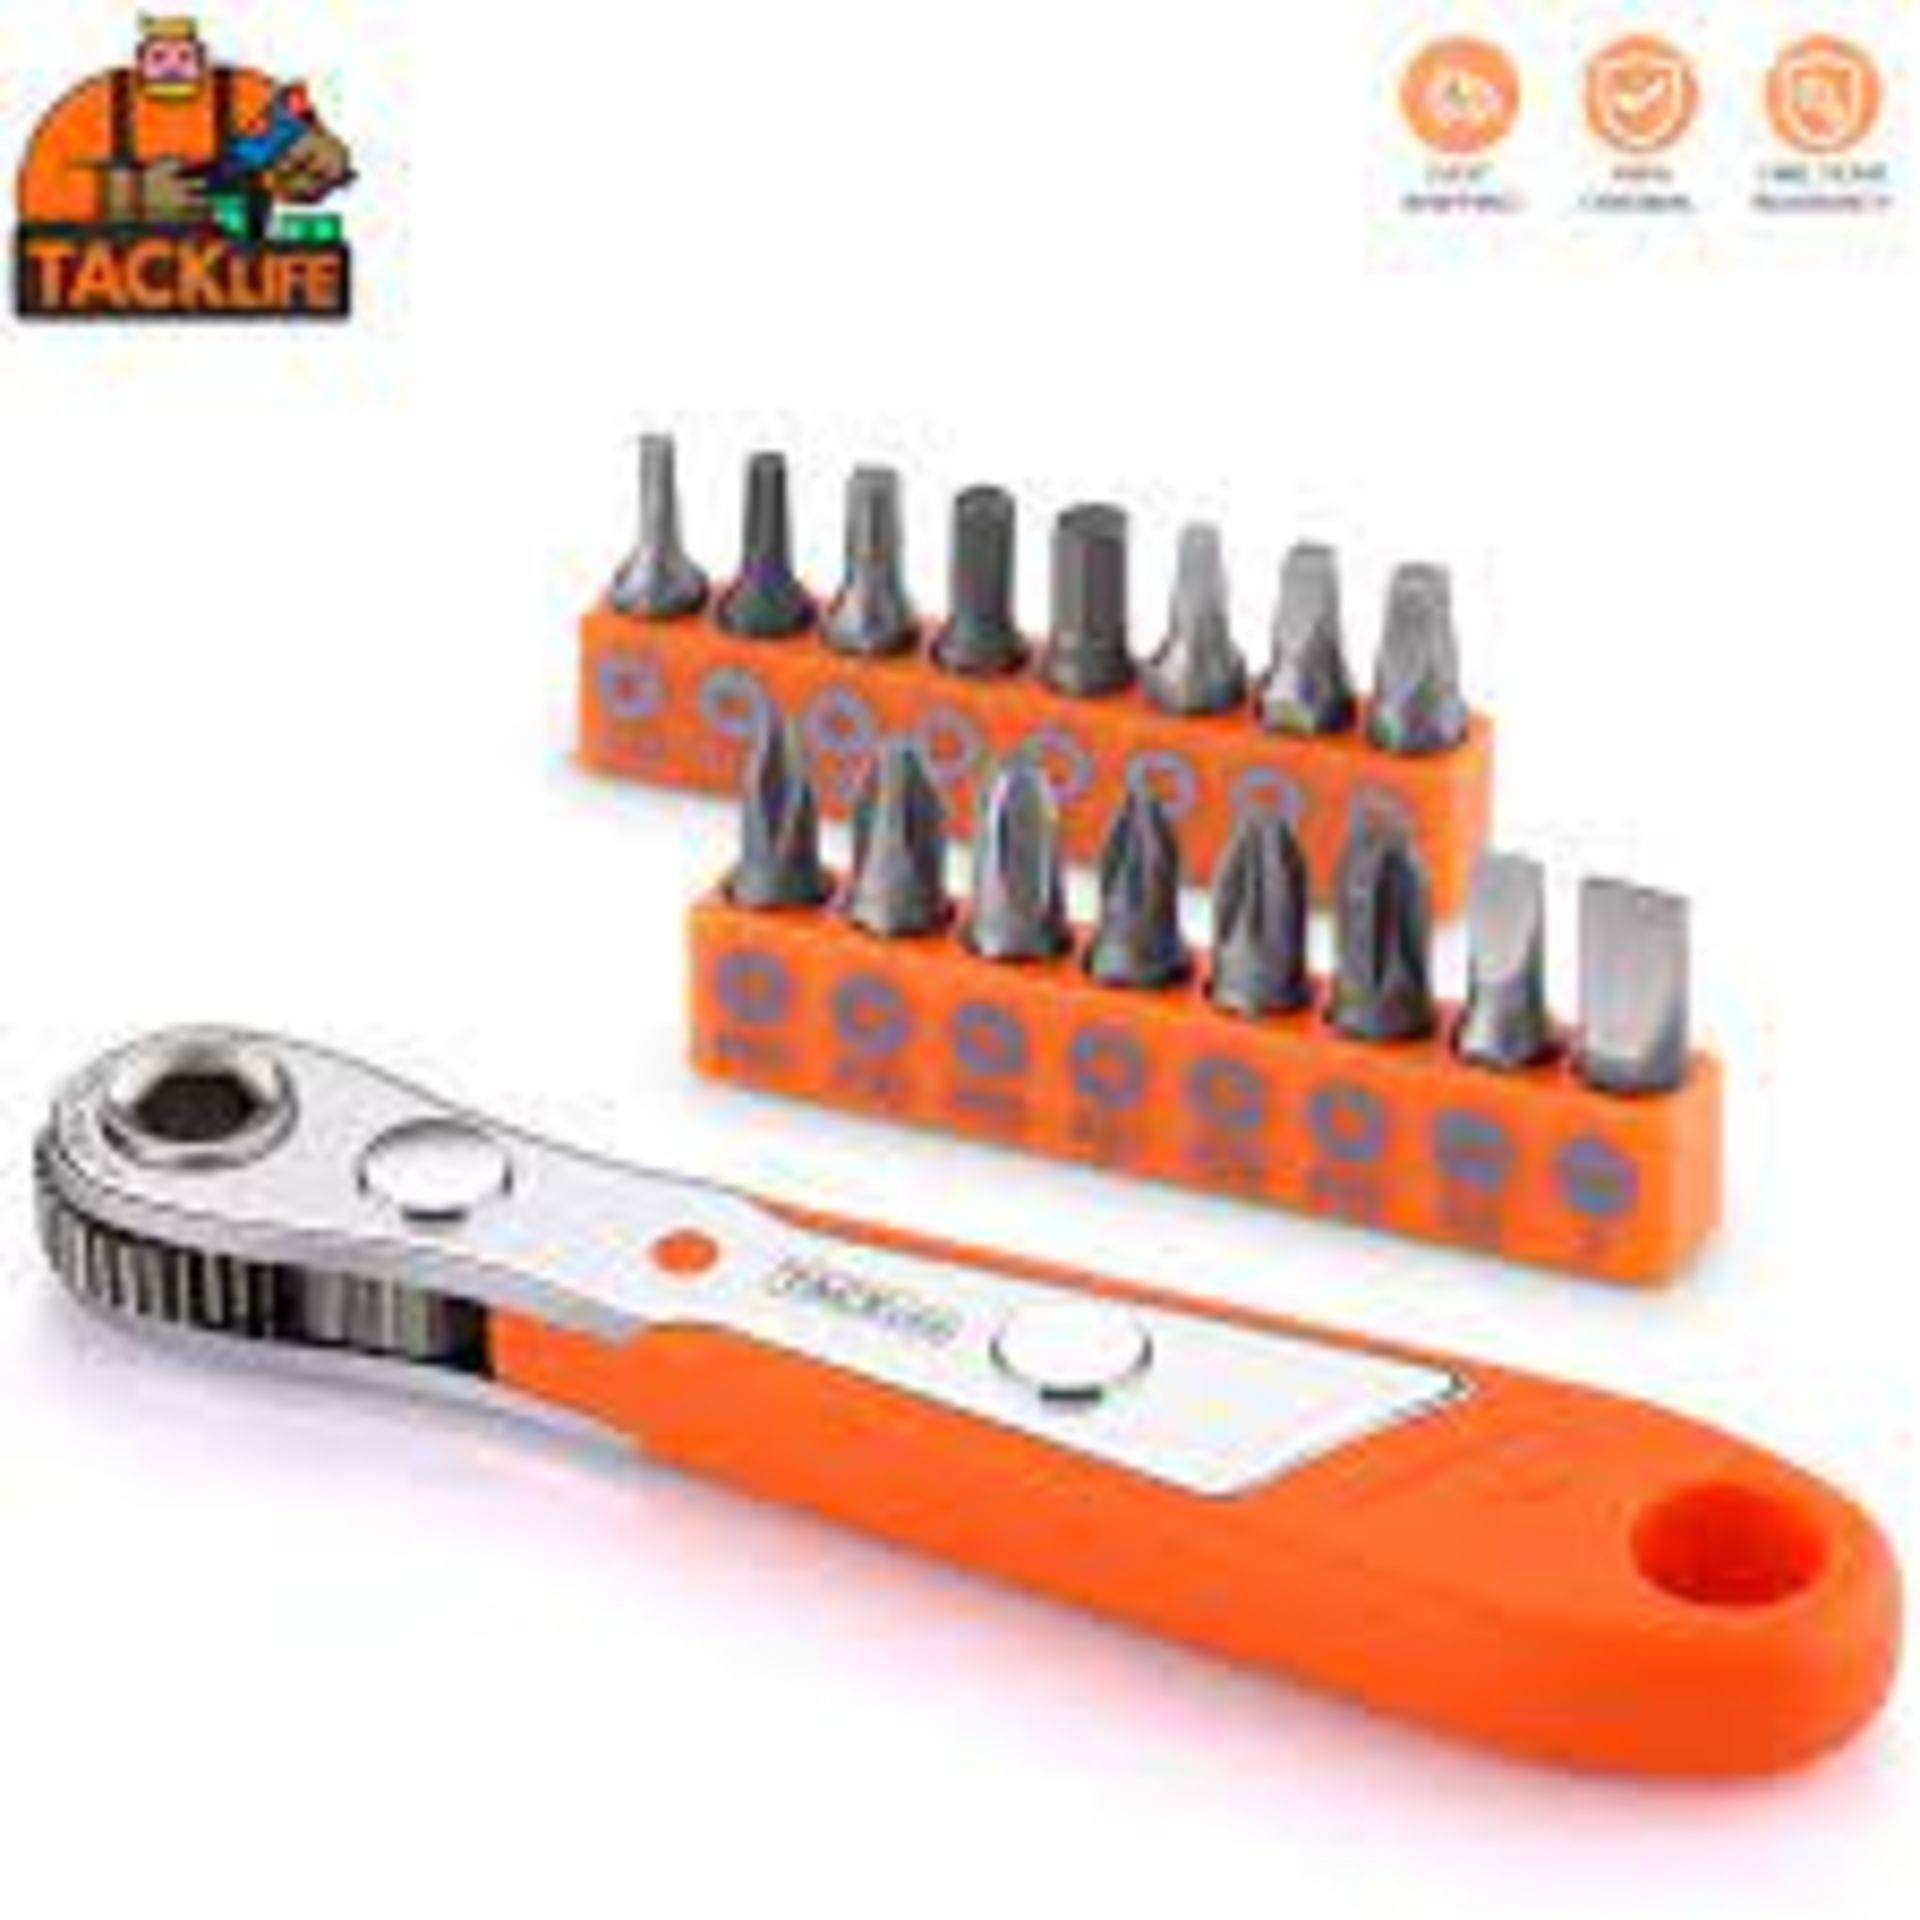 10 X NEW PACKAGED TACKLIFE HRSB1A Ratchet Wrench Set Ratchet Wheel with 36 Teeth Reversible Training